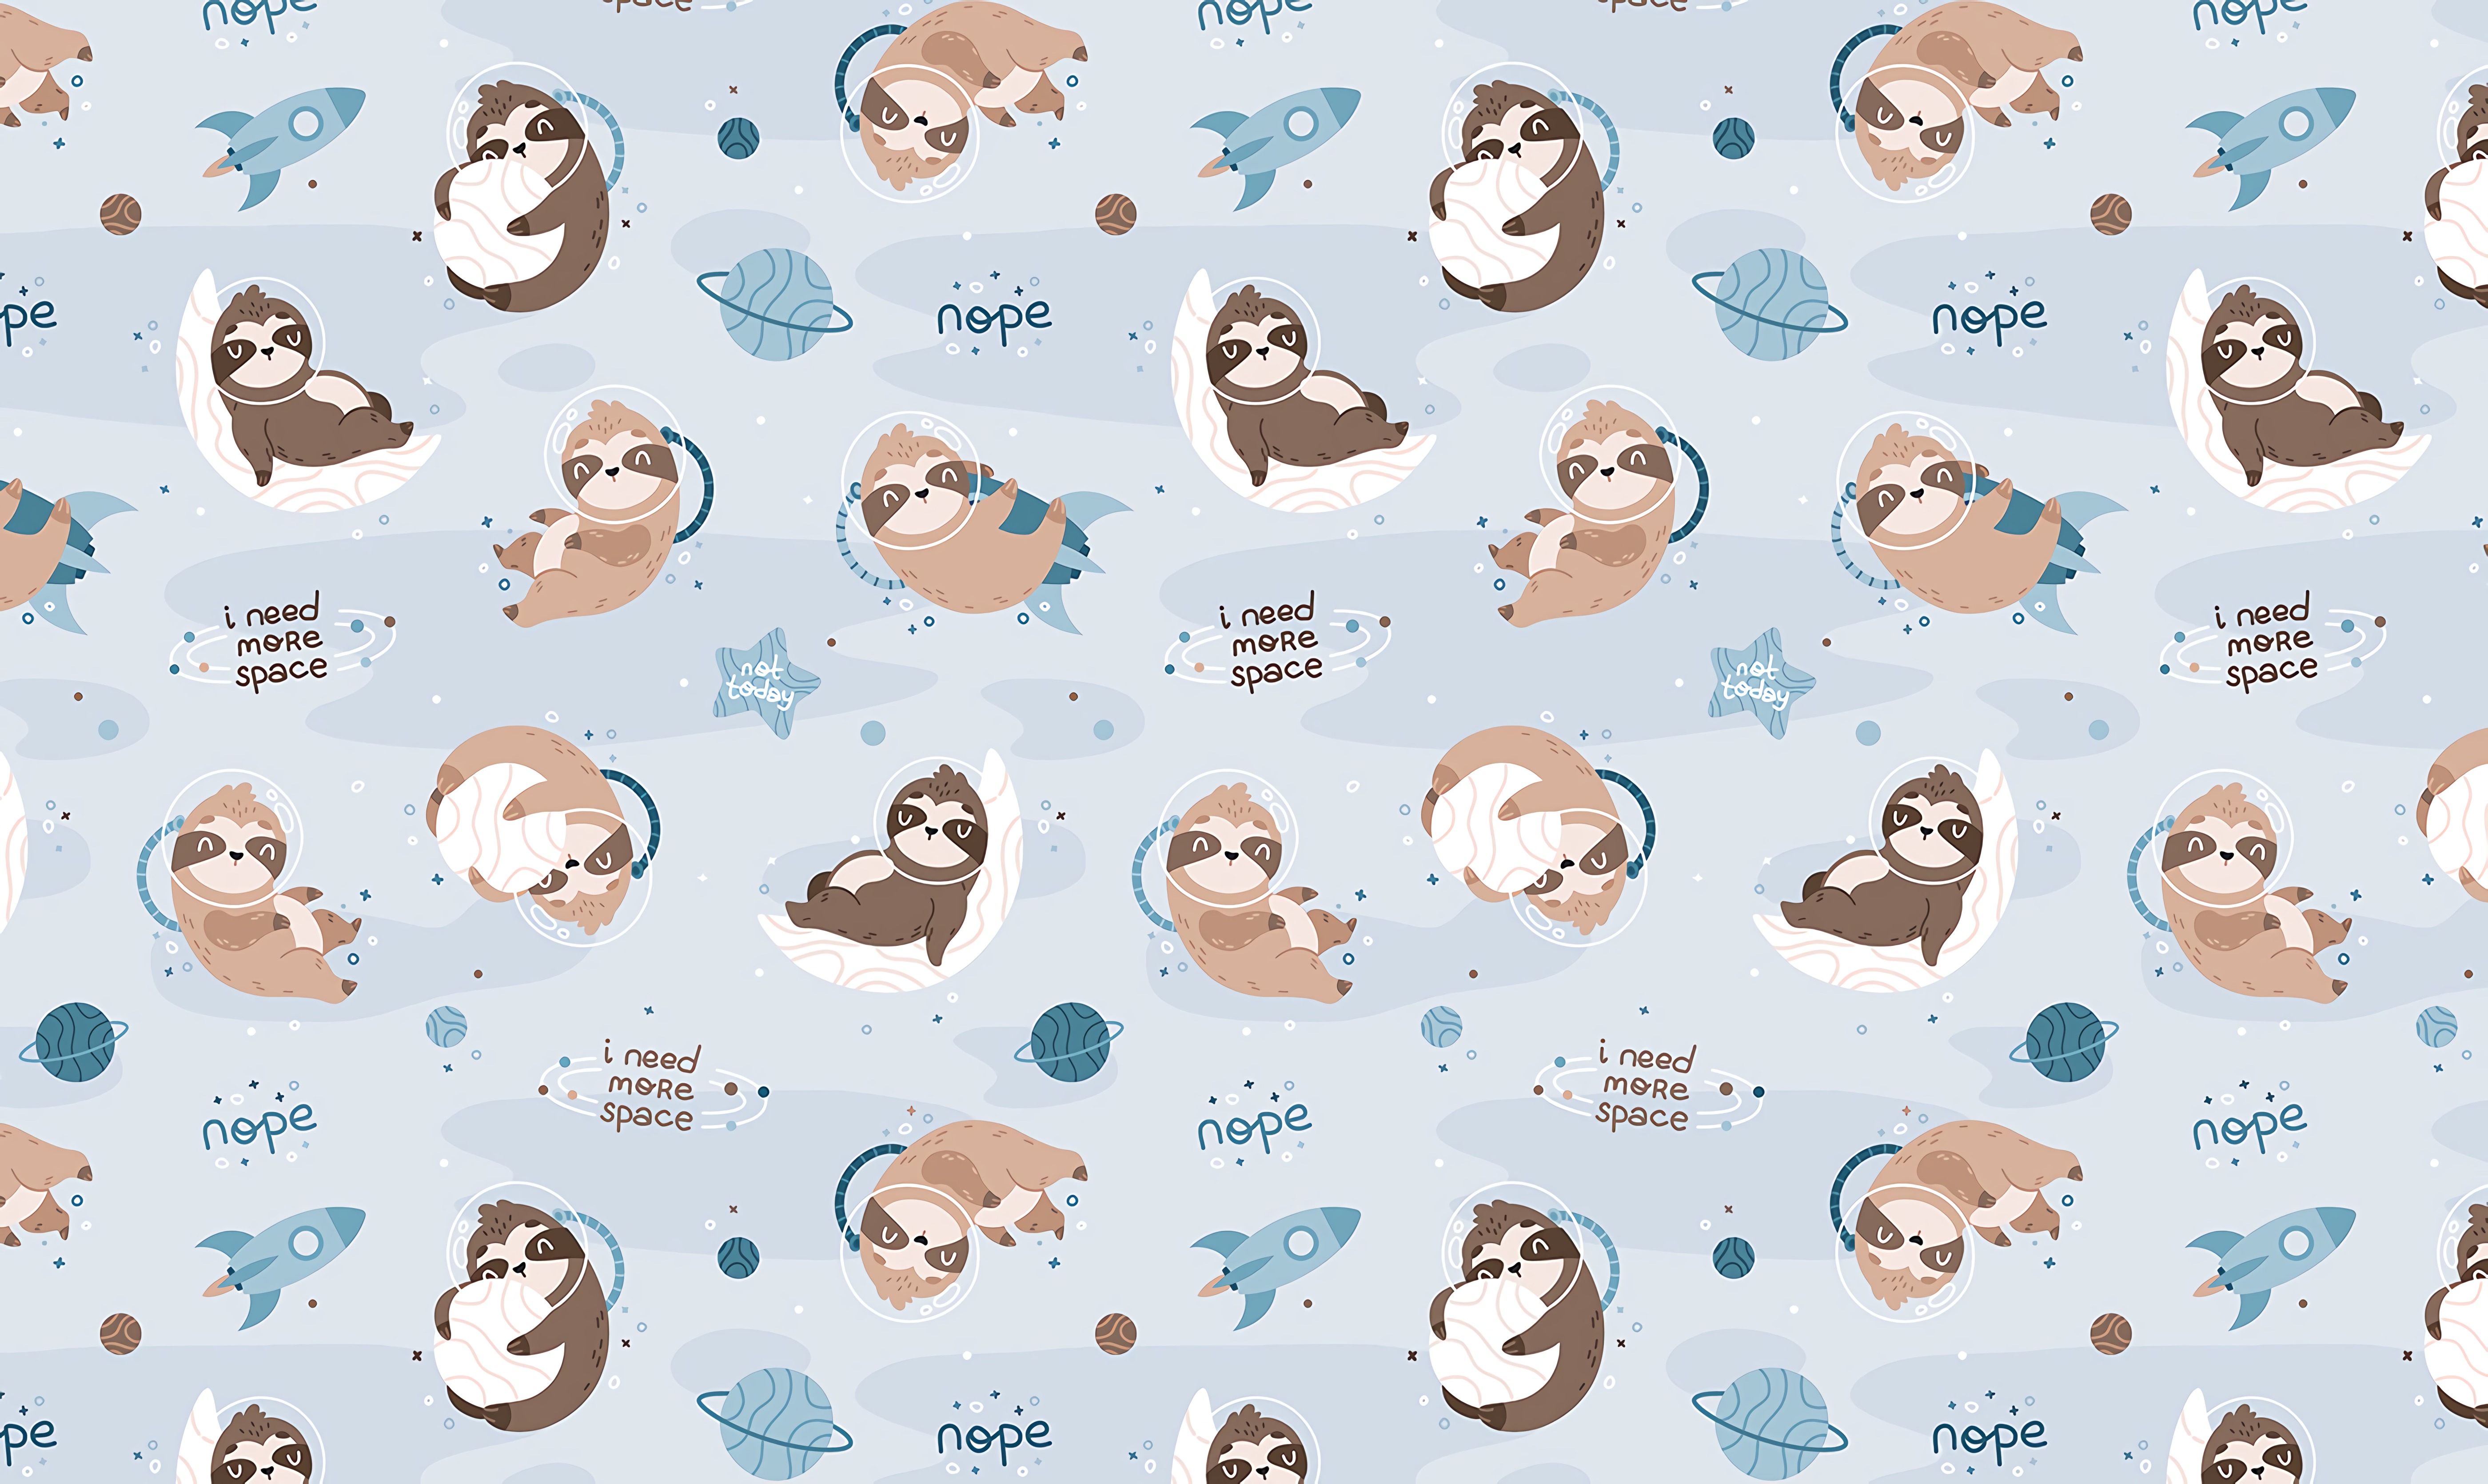 sloth, inscriptions, textures, pattern home screen for smartphone